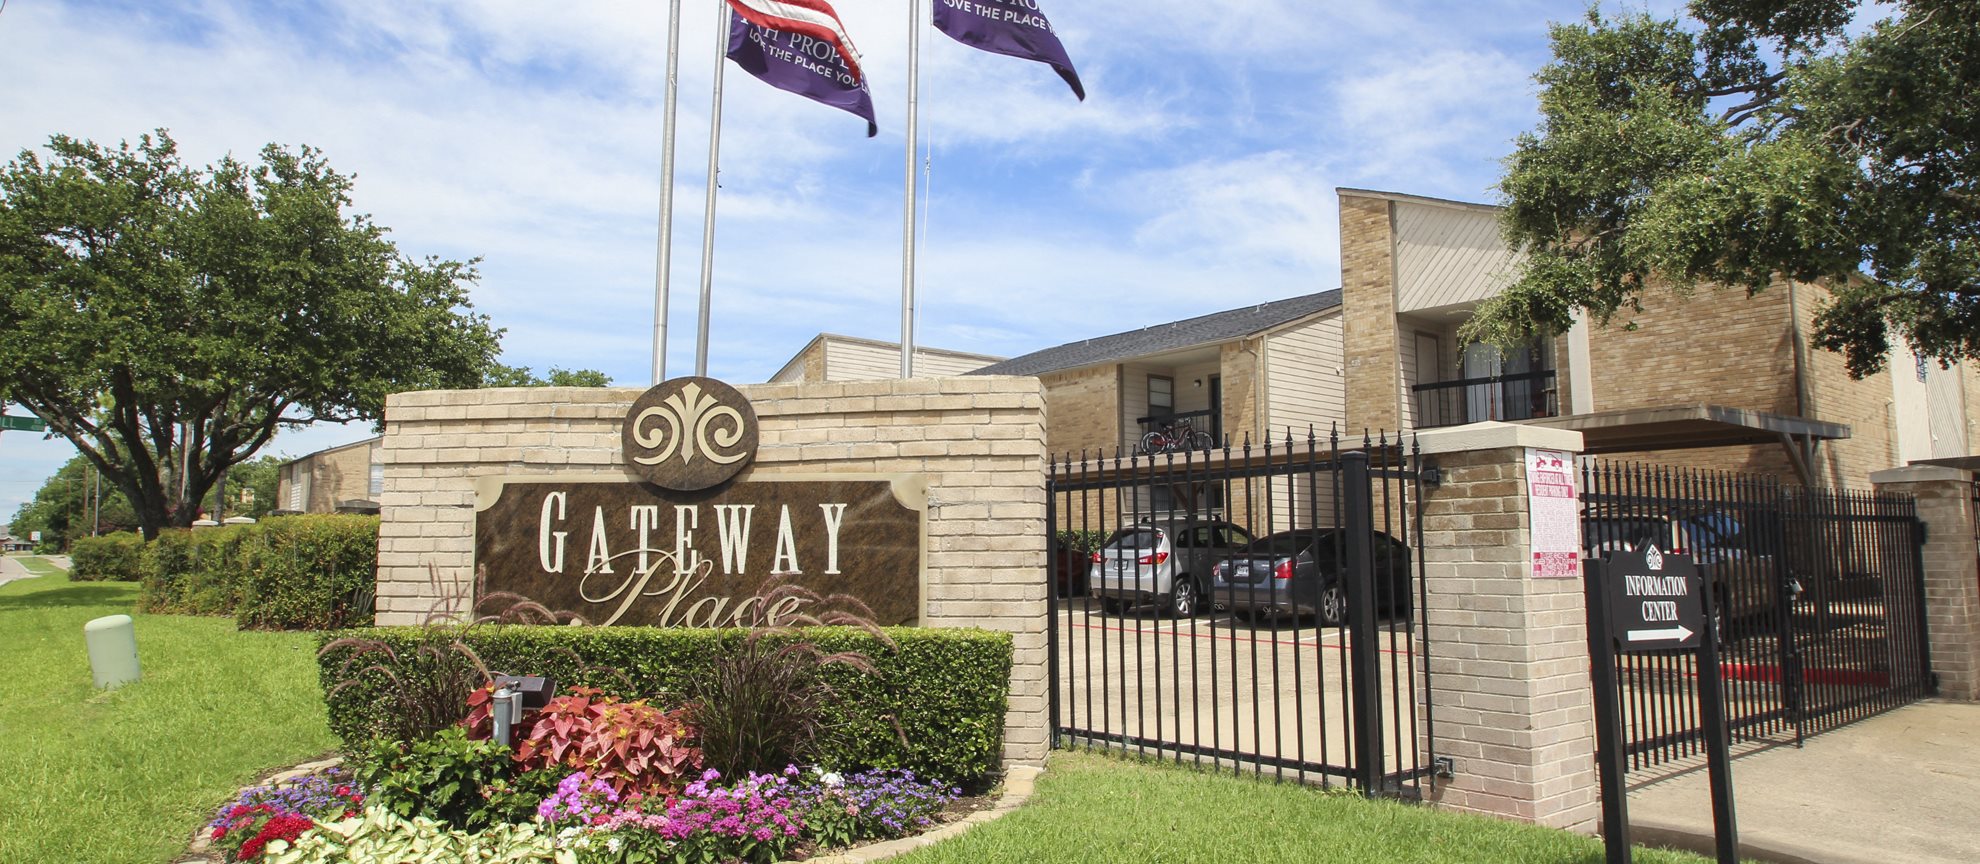 This is a picture of the entrance gate at Gateway Place Apartments in Garland, TX.